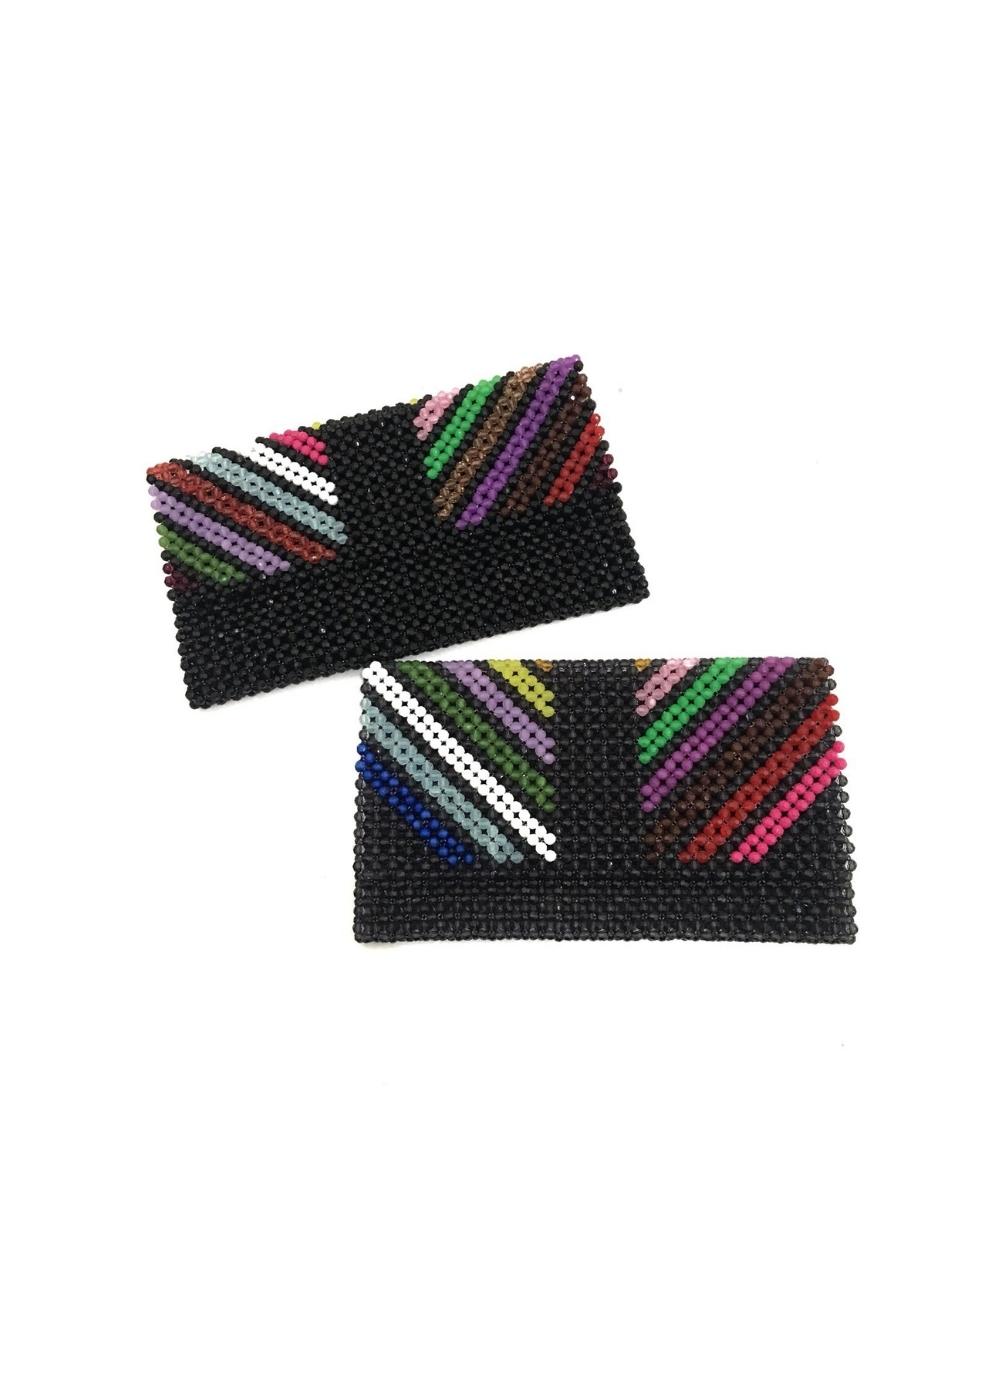 Beaded Clutch Bag (Small)